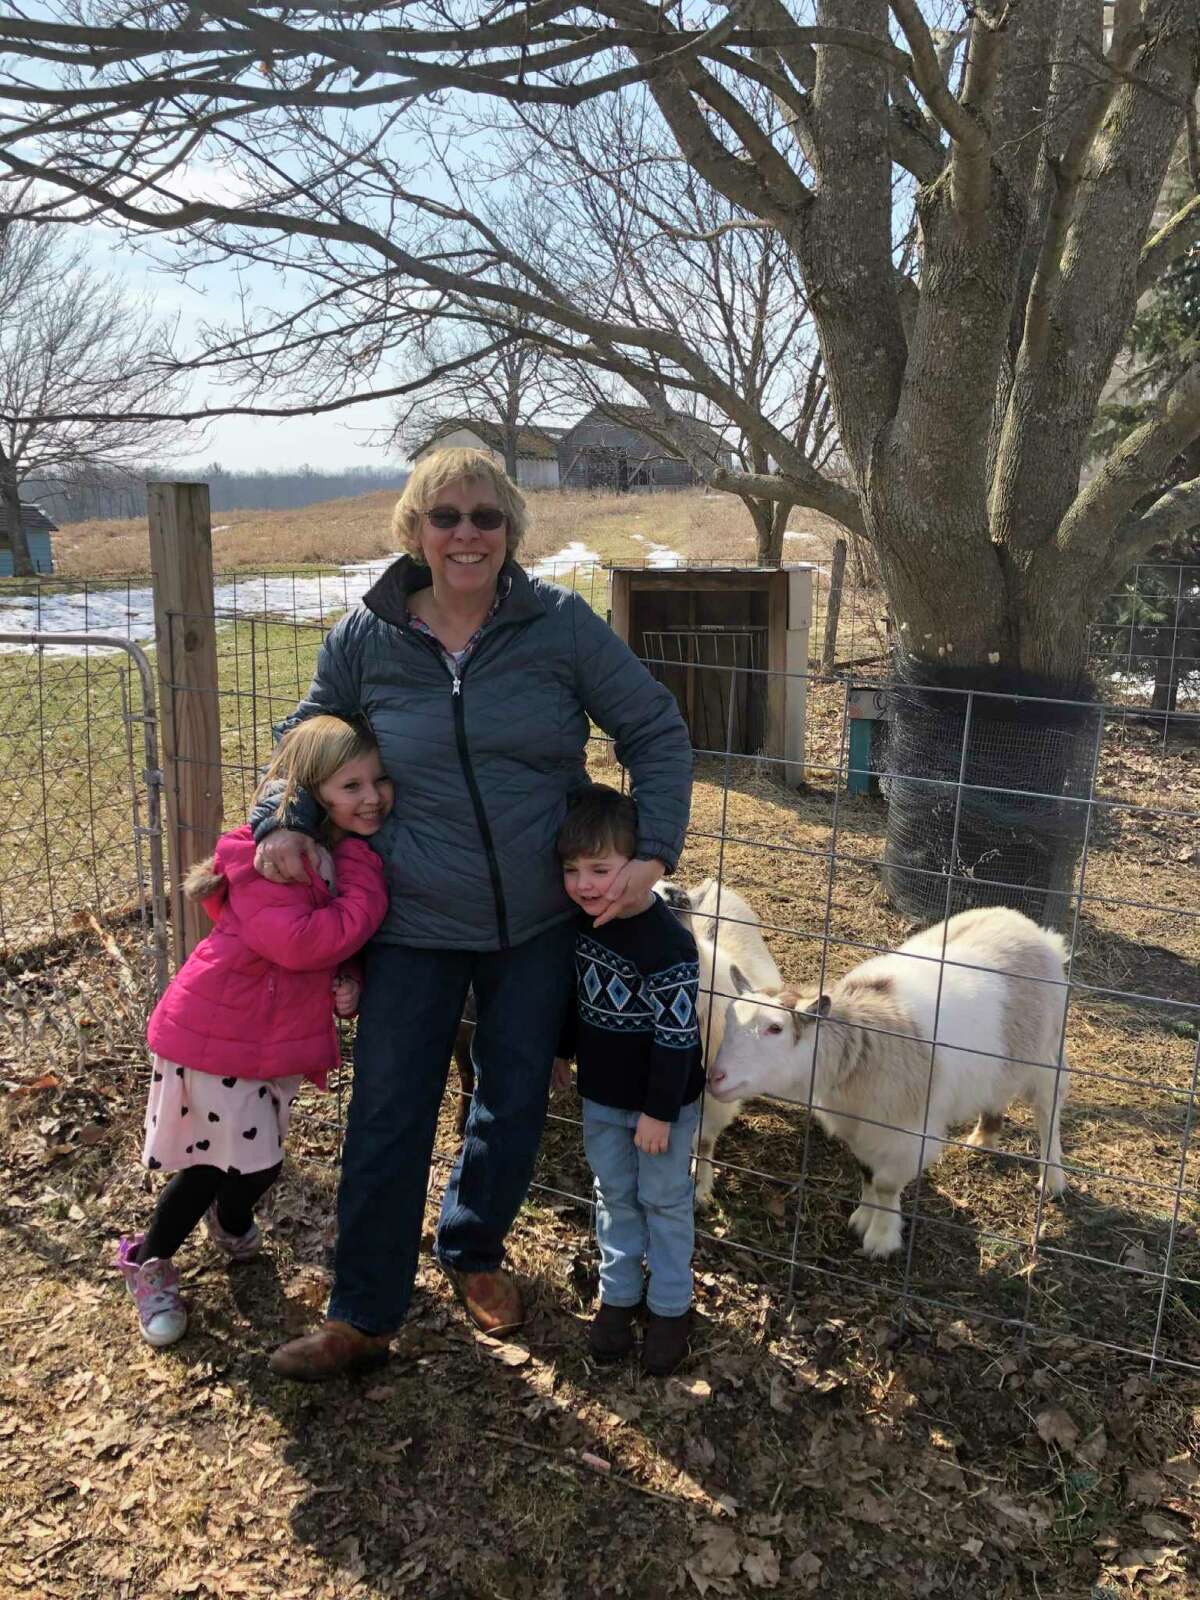 In her free time, Clark said she enjoys spending time with her grandkids, Piper and Oscar. "Oscar is named after my dad, so that was a real honor," she said. (Courtesy photo)